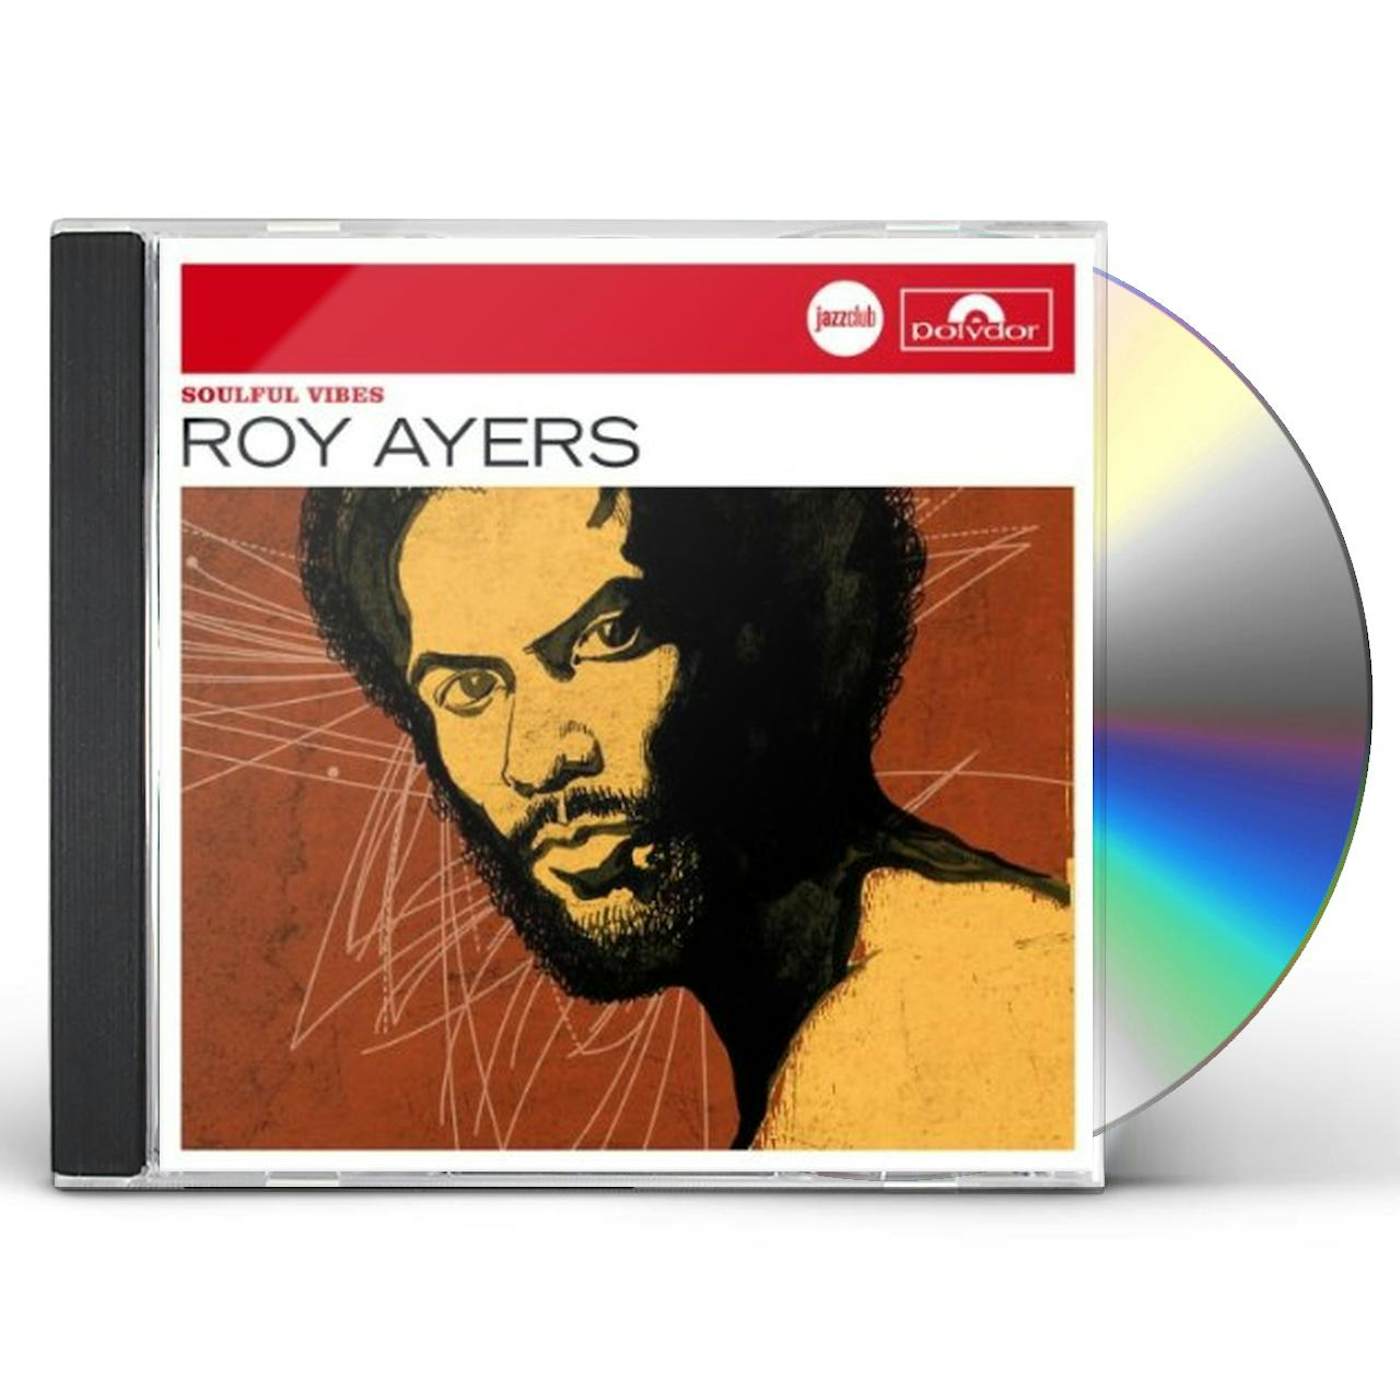 Roy Ayers SOULFUL VIBES CD